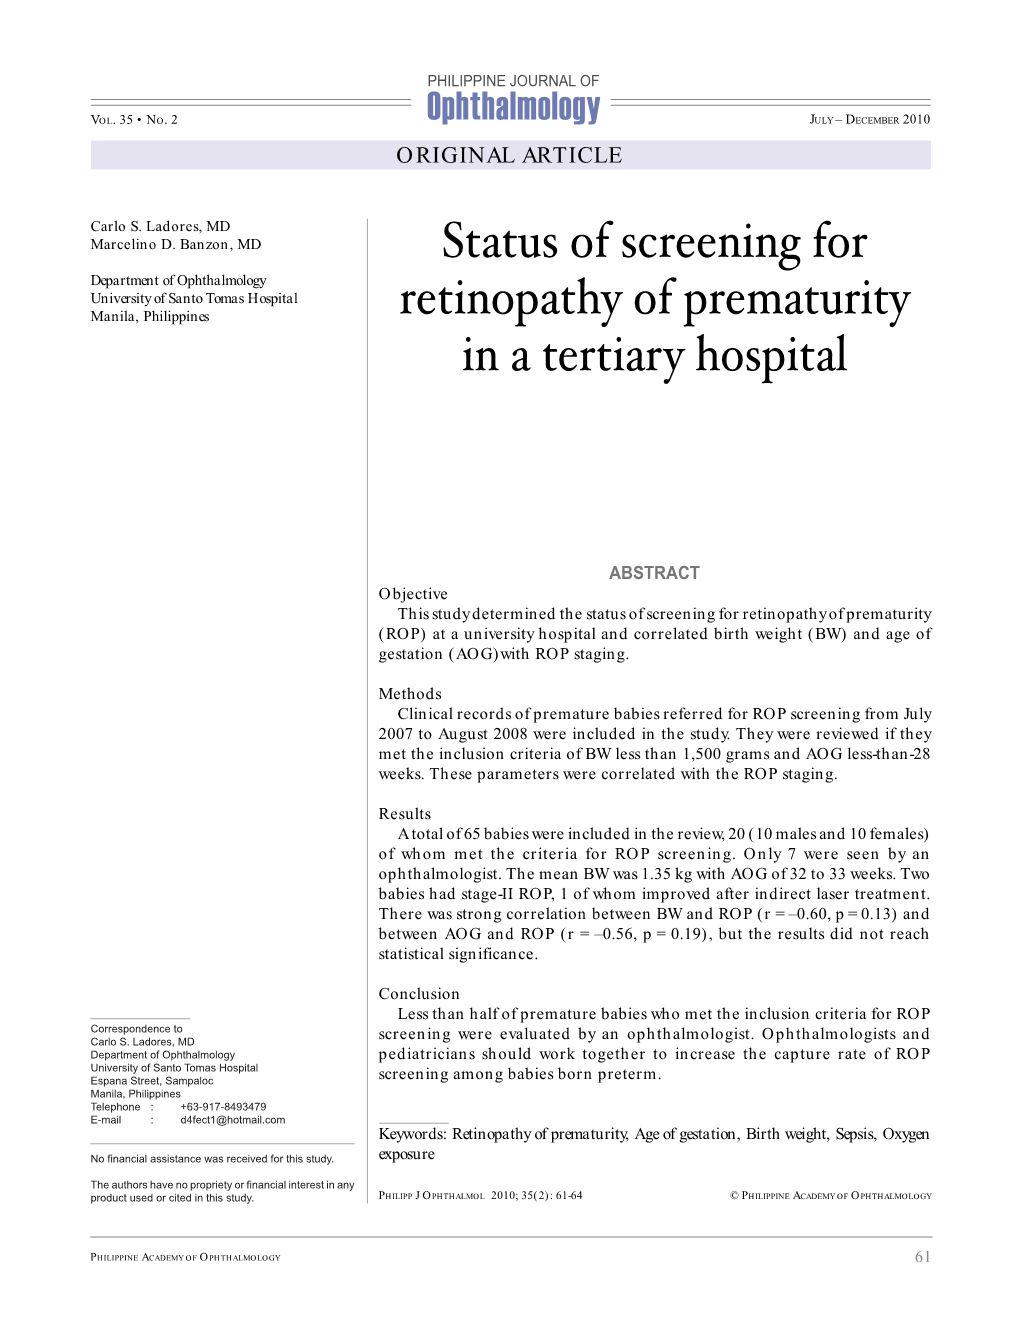 Status of Screening for Retinopathy of Prematurity in a Tertiary Hospital